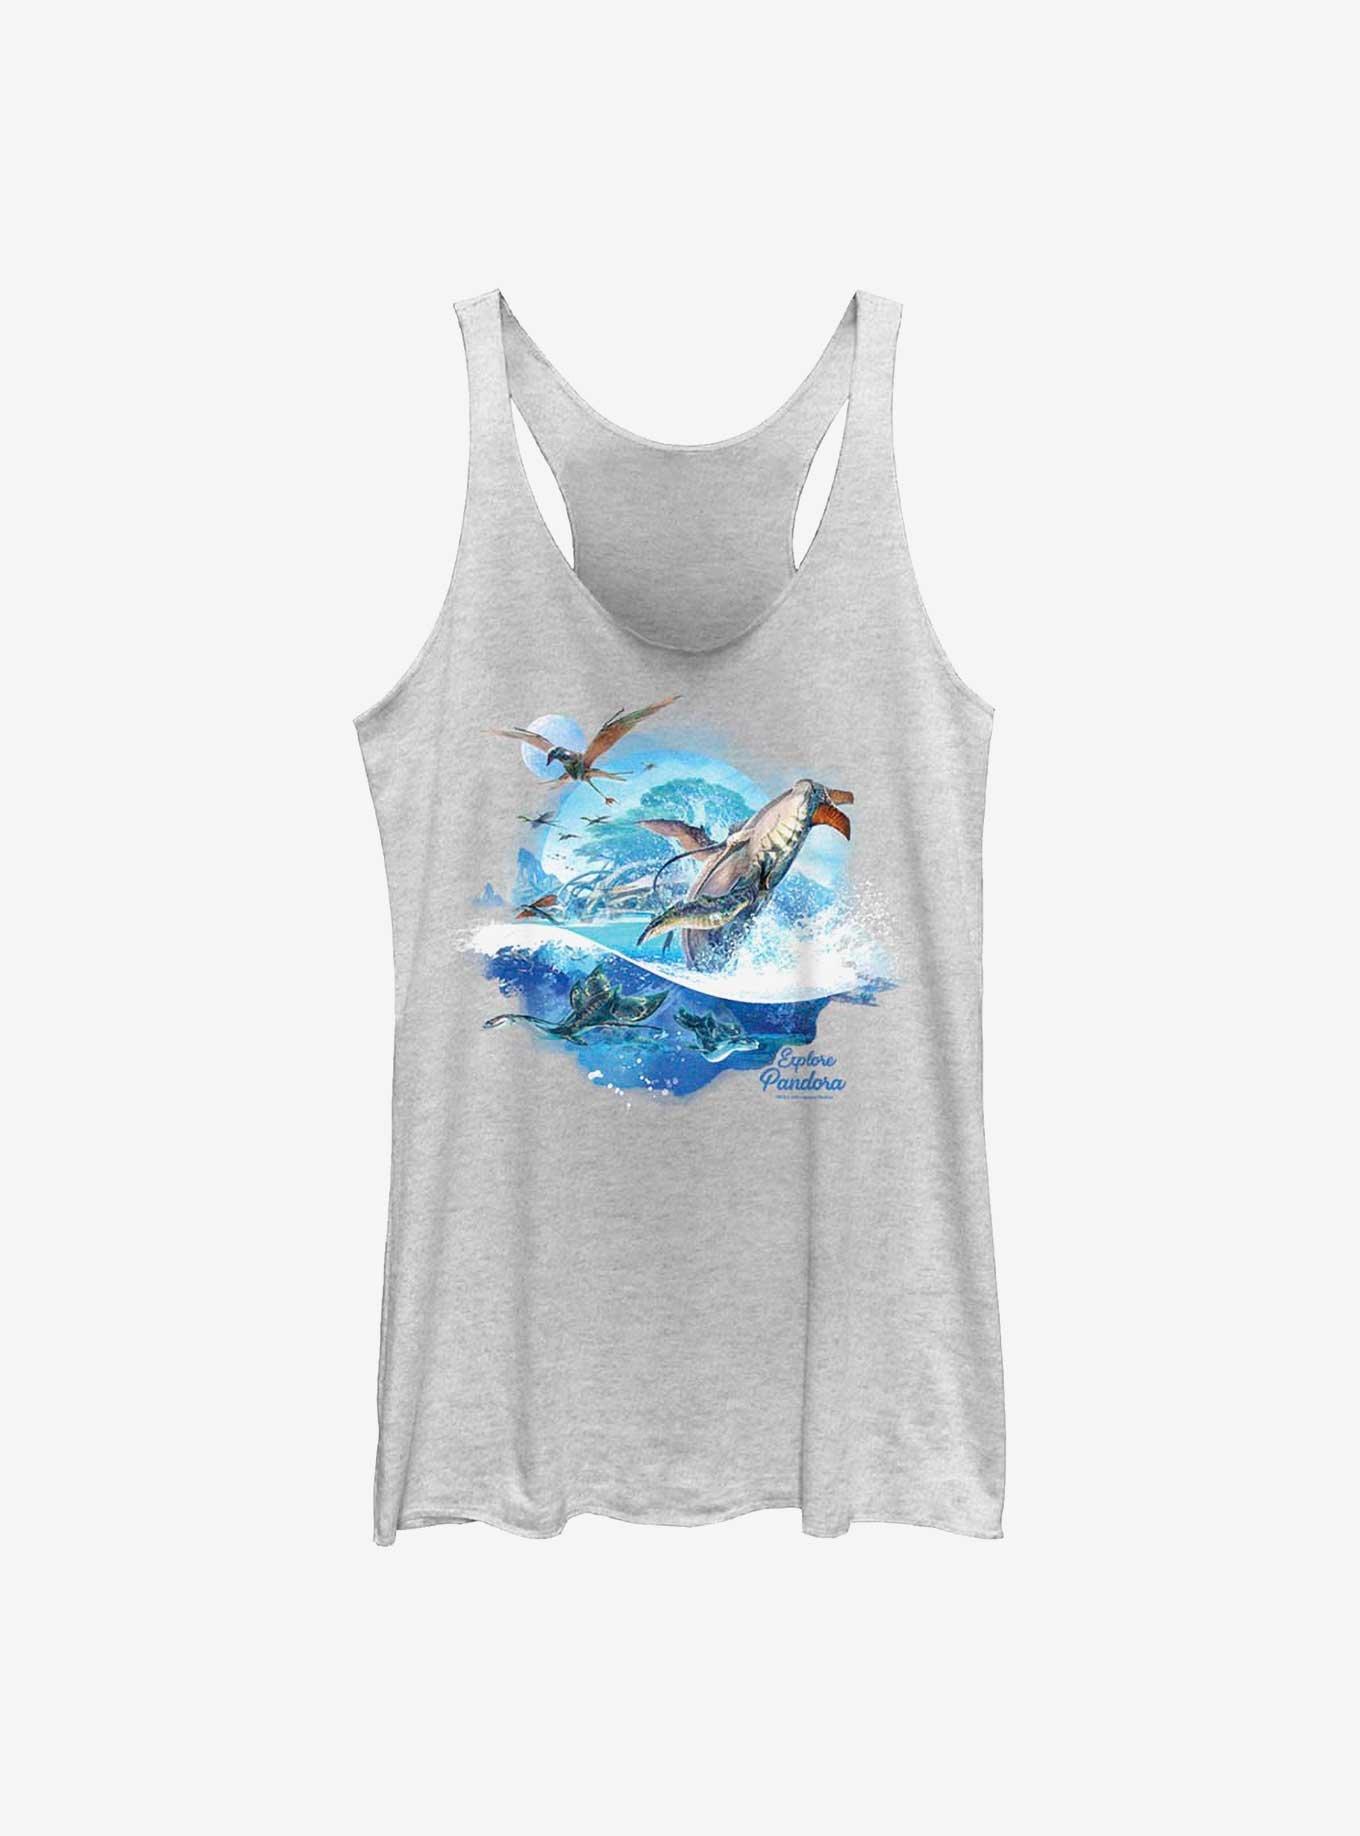 Avatar: The Way of Water Creatures of Pandora Girls Tank, WHITE HTR, hi-res